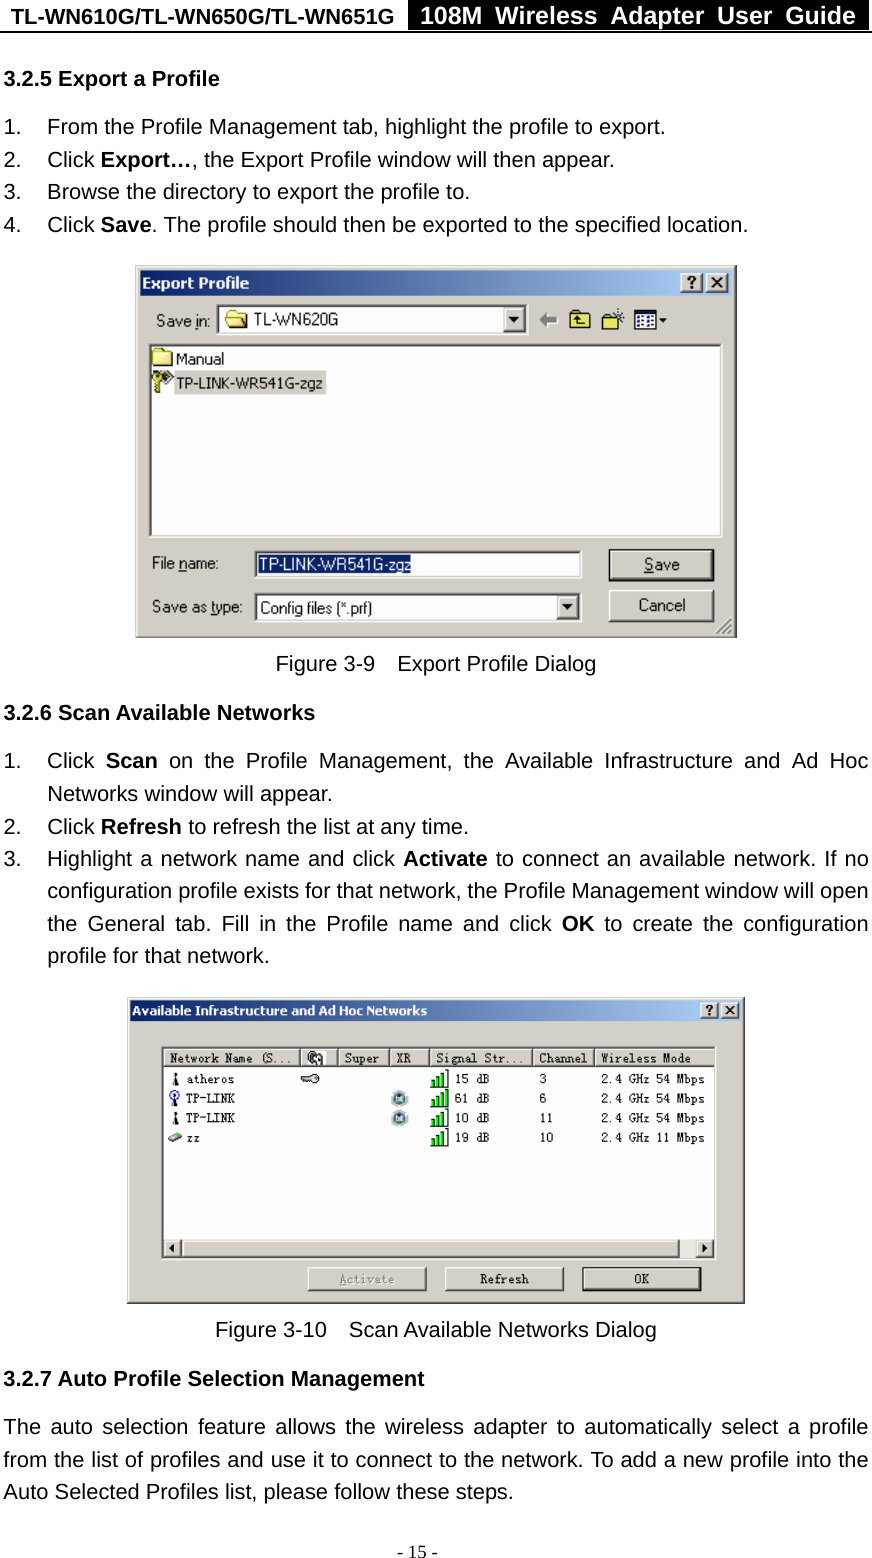 TL-WN610G/TL-WN650G/TL-WN651G  108M Wireless Adapter User Guide  - 15 - 3.2.5 Export a Profile 1.  From the Profile Management tab, highlight the profile to export. 2. Click Export…, the Export Profile window will then appear. 3.  Browse the directory to export the profile to. 4. Click Save. The profile should then be exported to the specified location.  Figure 3-9    Export Profile Dialog 3.2.6 Scan Available Networks 1. Click Scan on the Profile Management, the Available Infrastructure and Ad Hoc Networks window will appear. 2. Click Refresh to refresh the list at any time. 3.  Highlight a network name and click Activate to connect an available network. If no configuration profile exists for that network, the Profile Management window will open the General tab. Fill in the Profile name and click OK to create the configuration profile for that network.  Figure 3-10    Scan Available Networks Dialog 3.2.7 Auto Profile Selection Management The auto selection feature allows the wireless adapter to automatically select a profile from the list of profiles and use it to connect to the network. To add a new profile into the Auto Selected Profiles list, please follow these steps. 